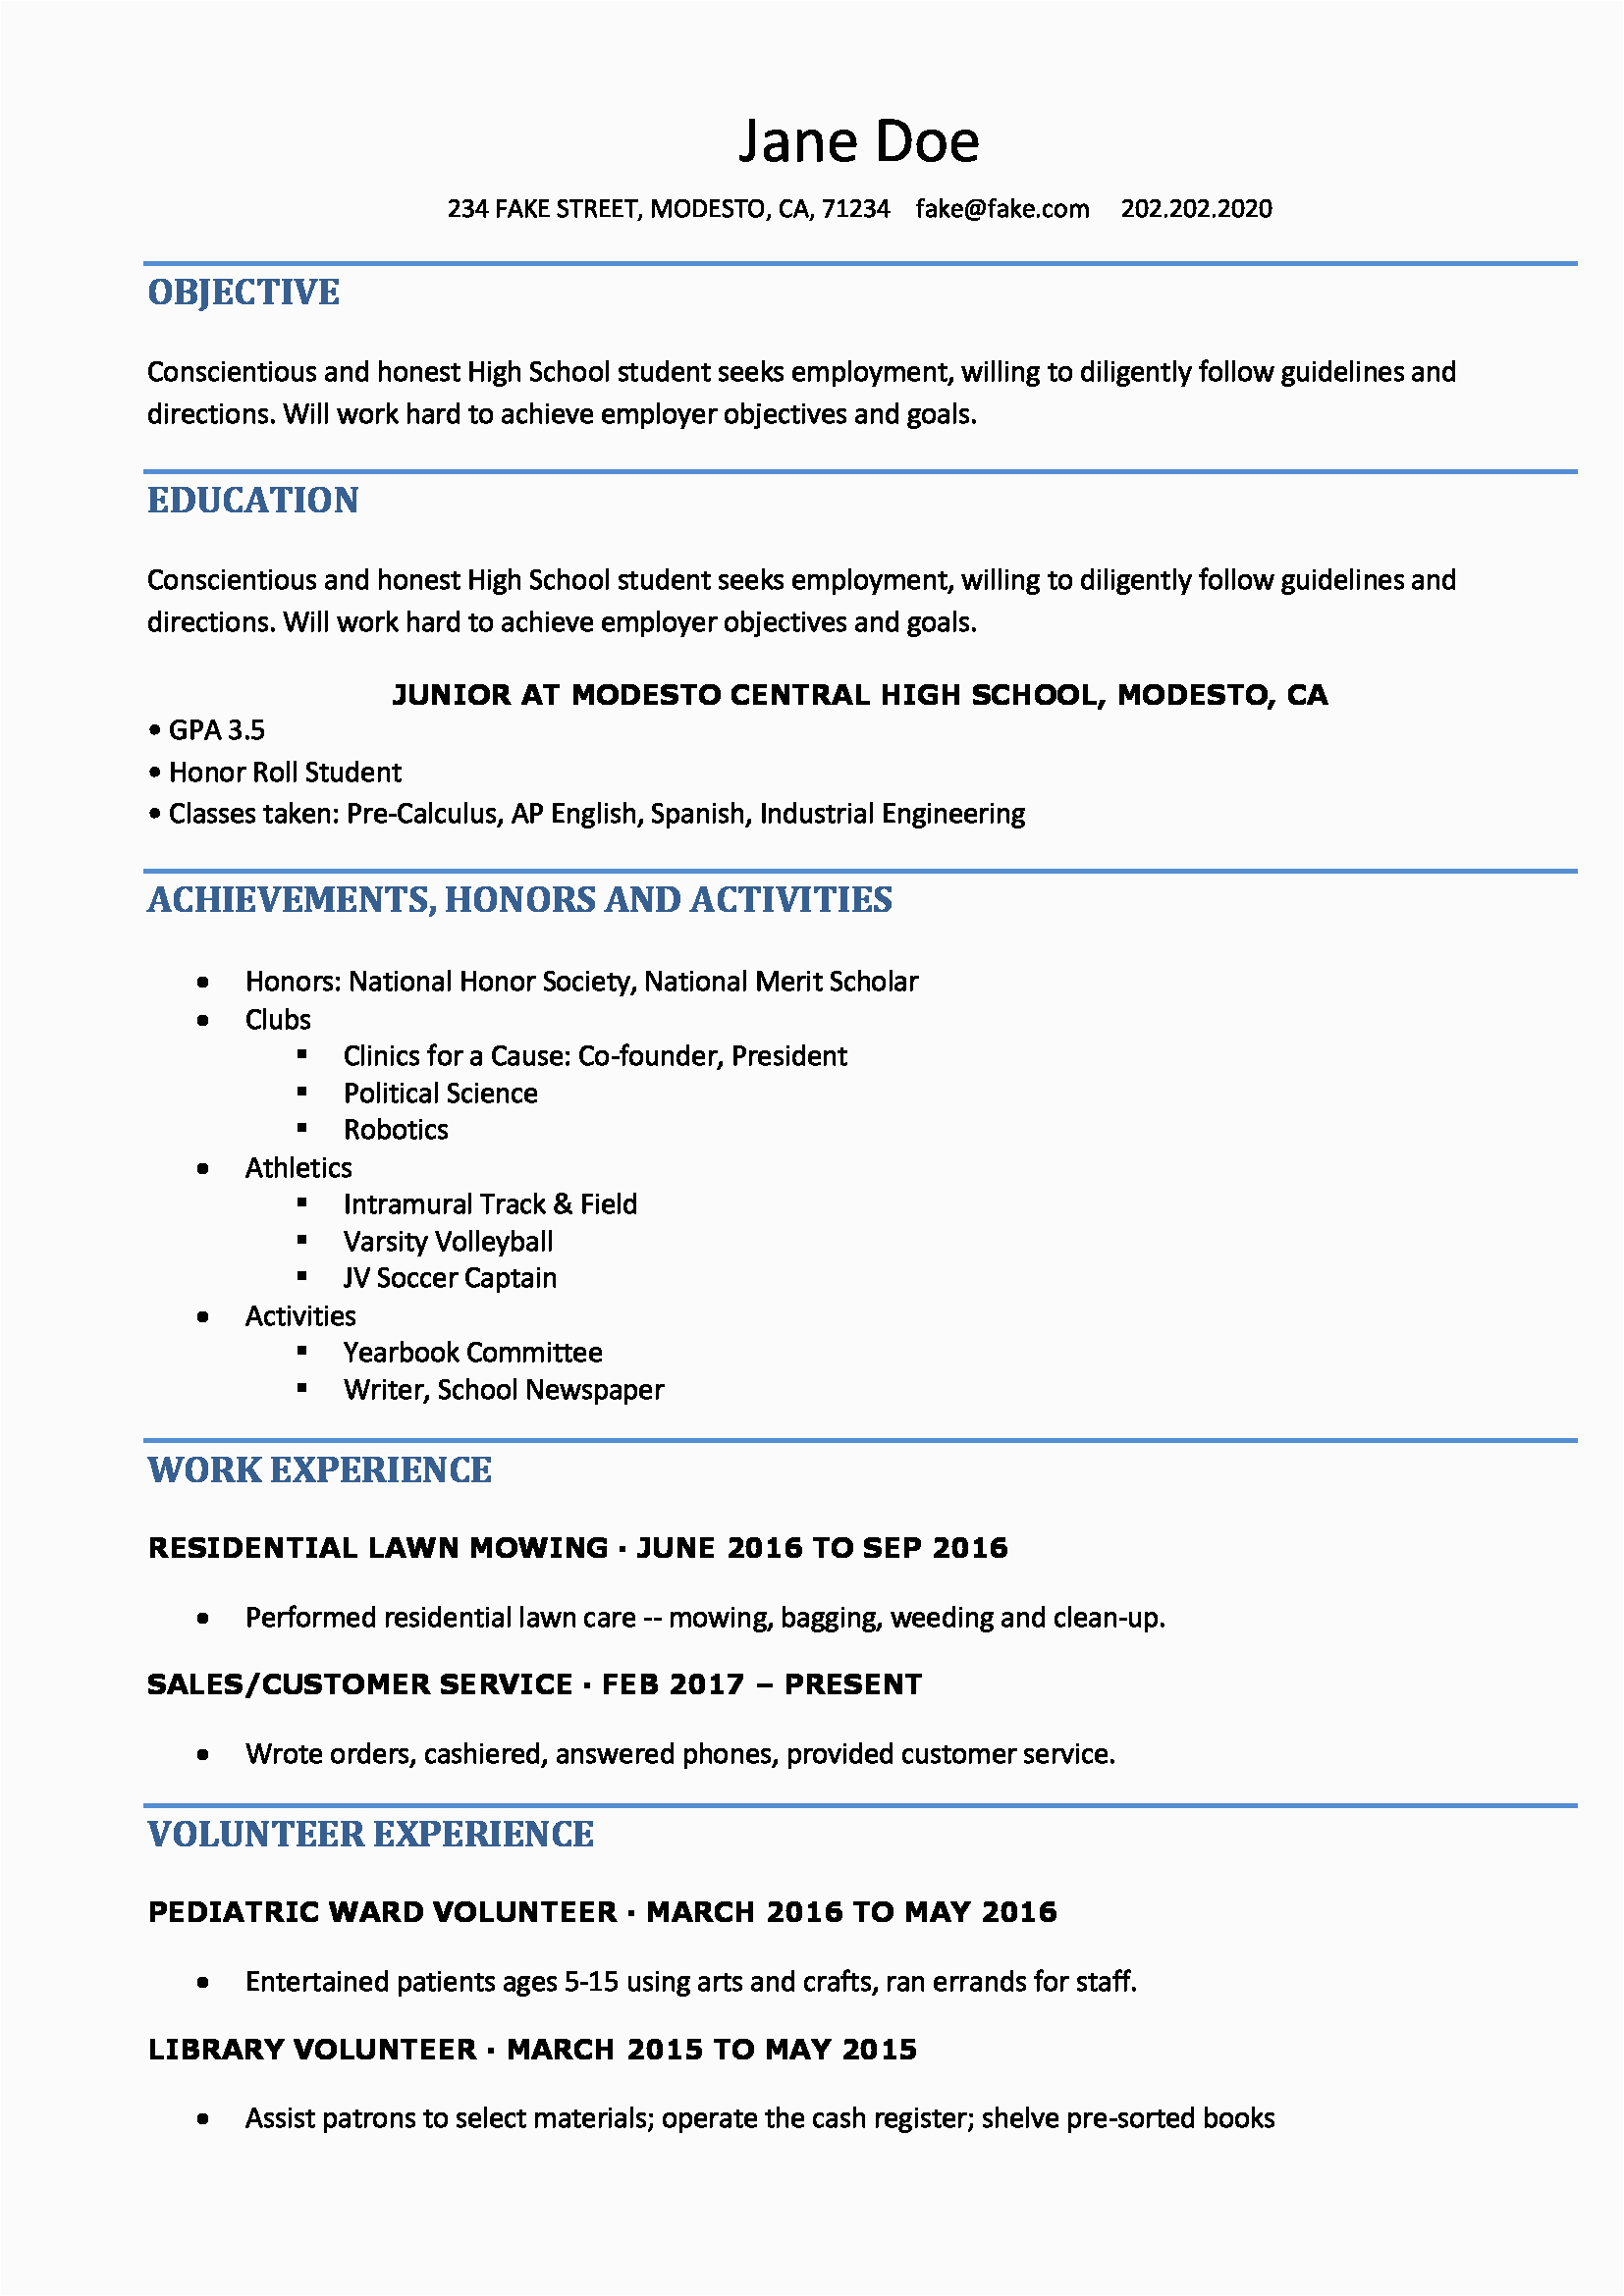 Sample Resume From A High School Student High School Resume Resume Templates for High School Students and Teens